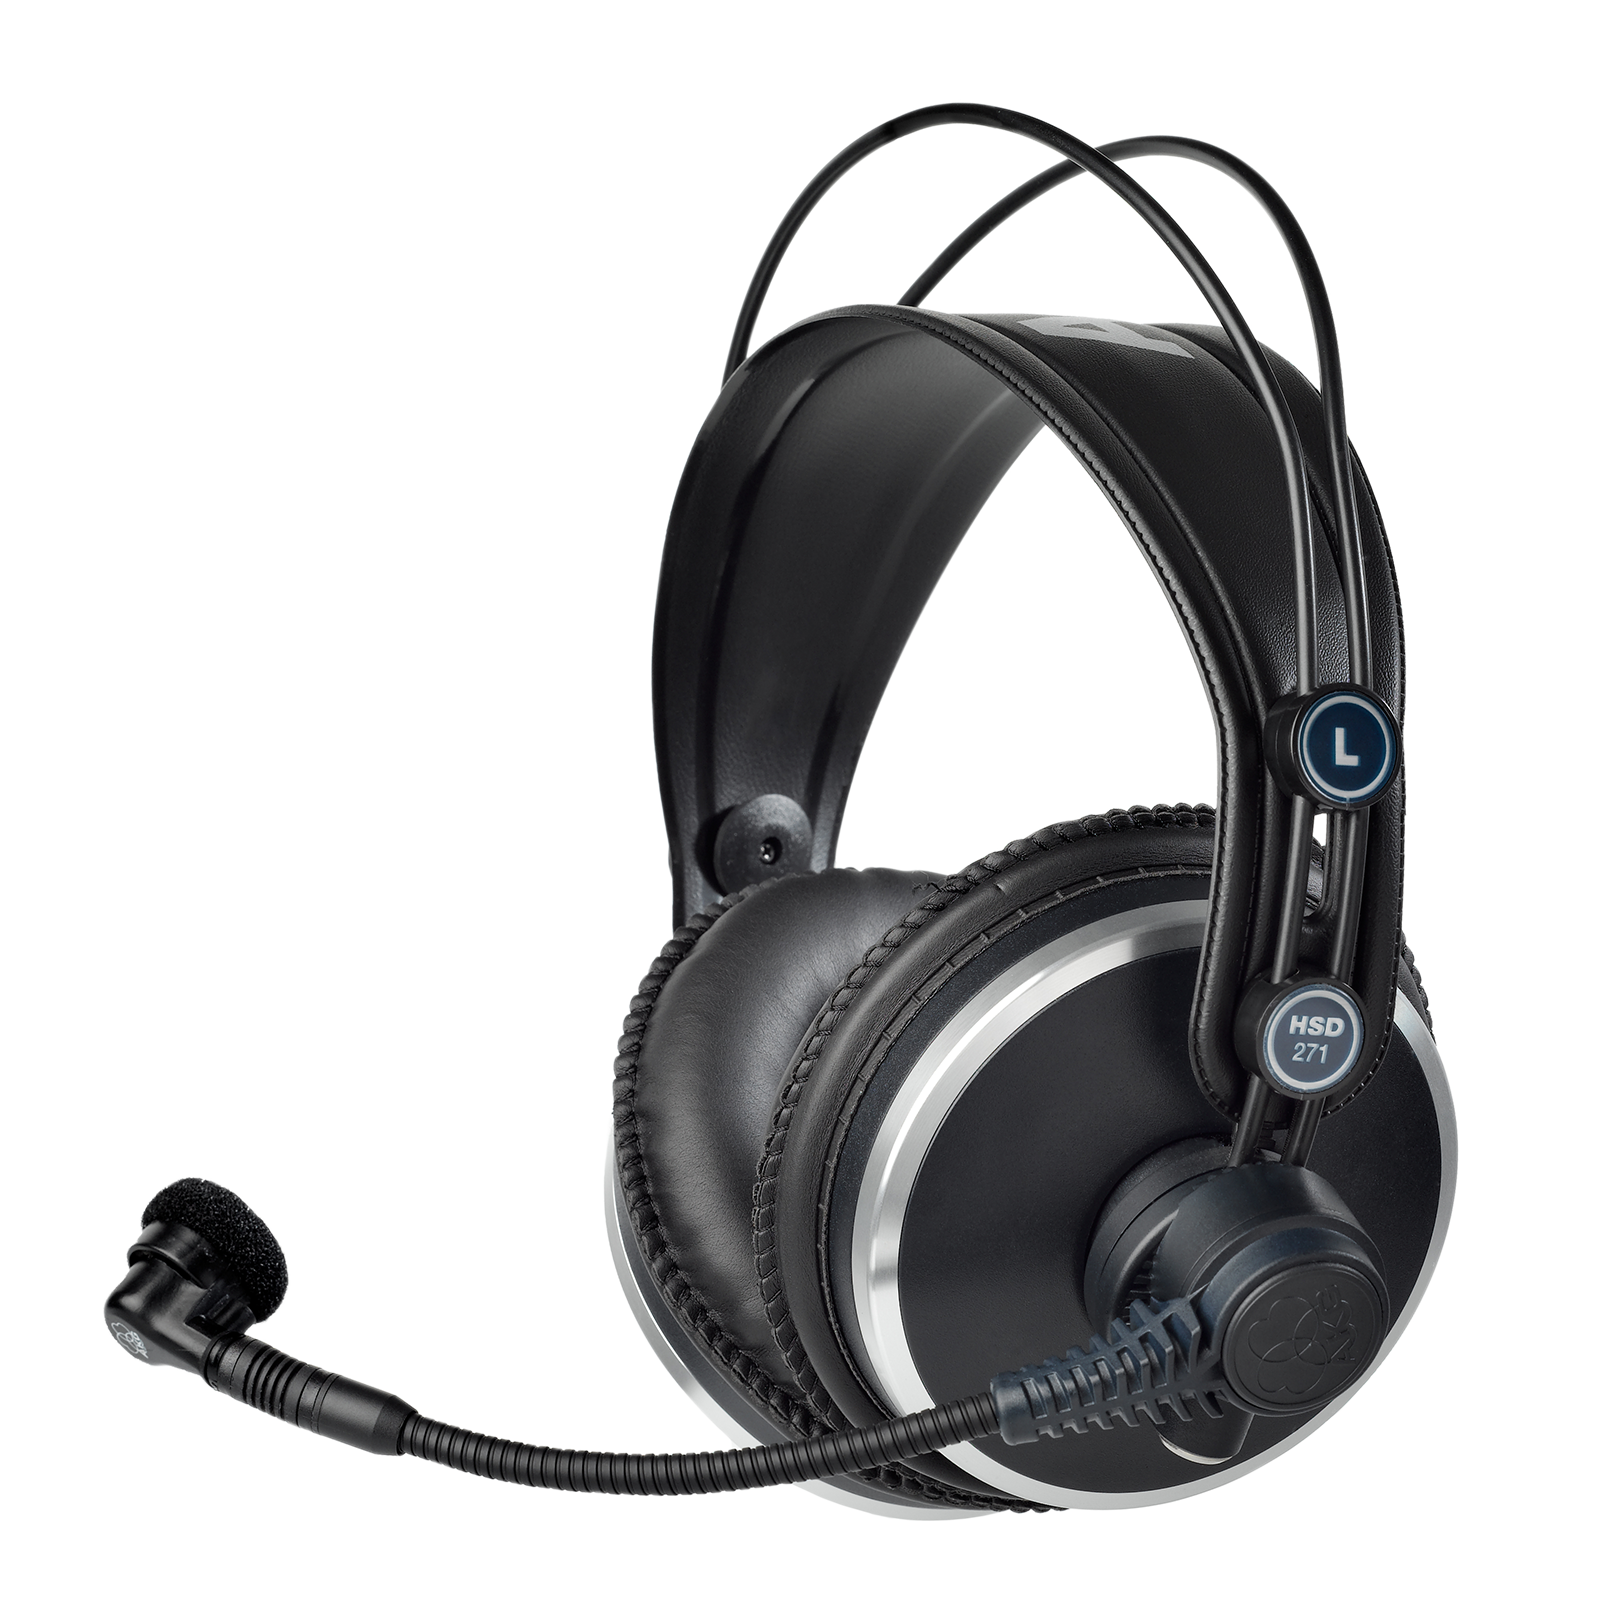 HSD271 (B-Stock) - Black - Professional over-ear headset with dynamic microphone - Hero